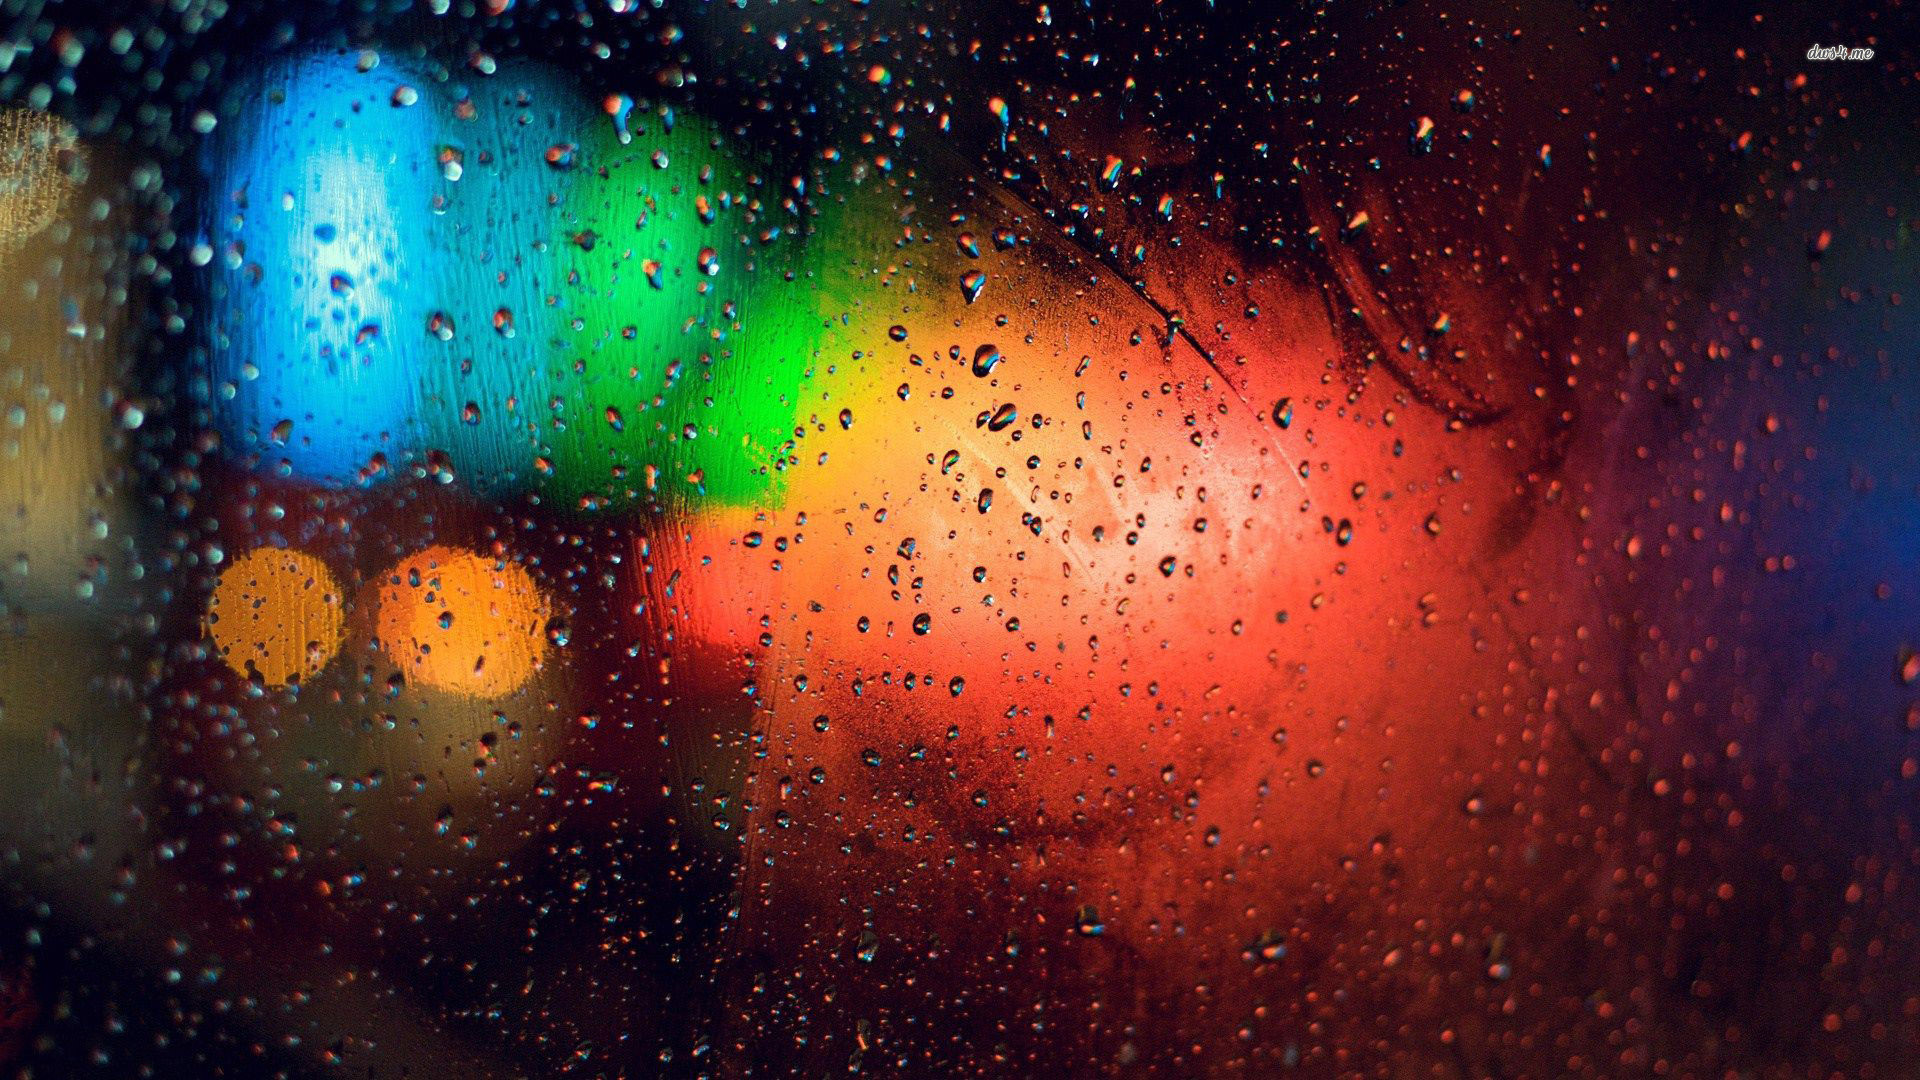 1920x1080 Name: 20202-colorful-lights-behind-the-wet-window-